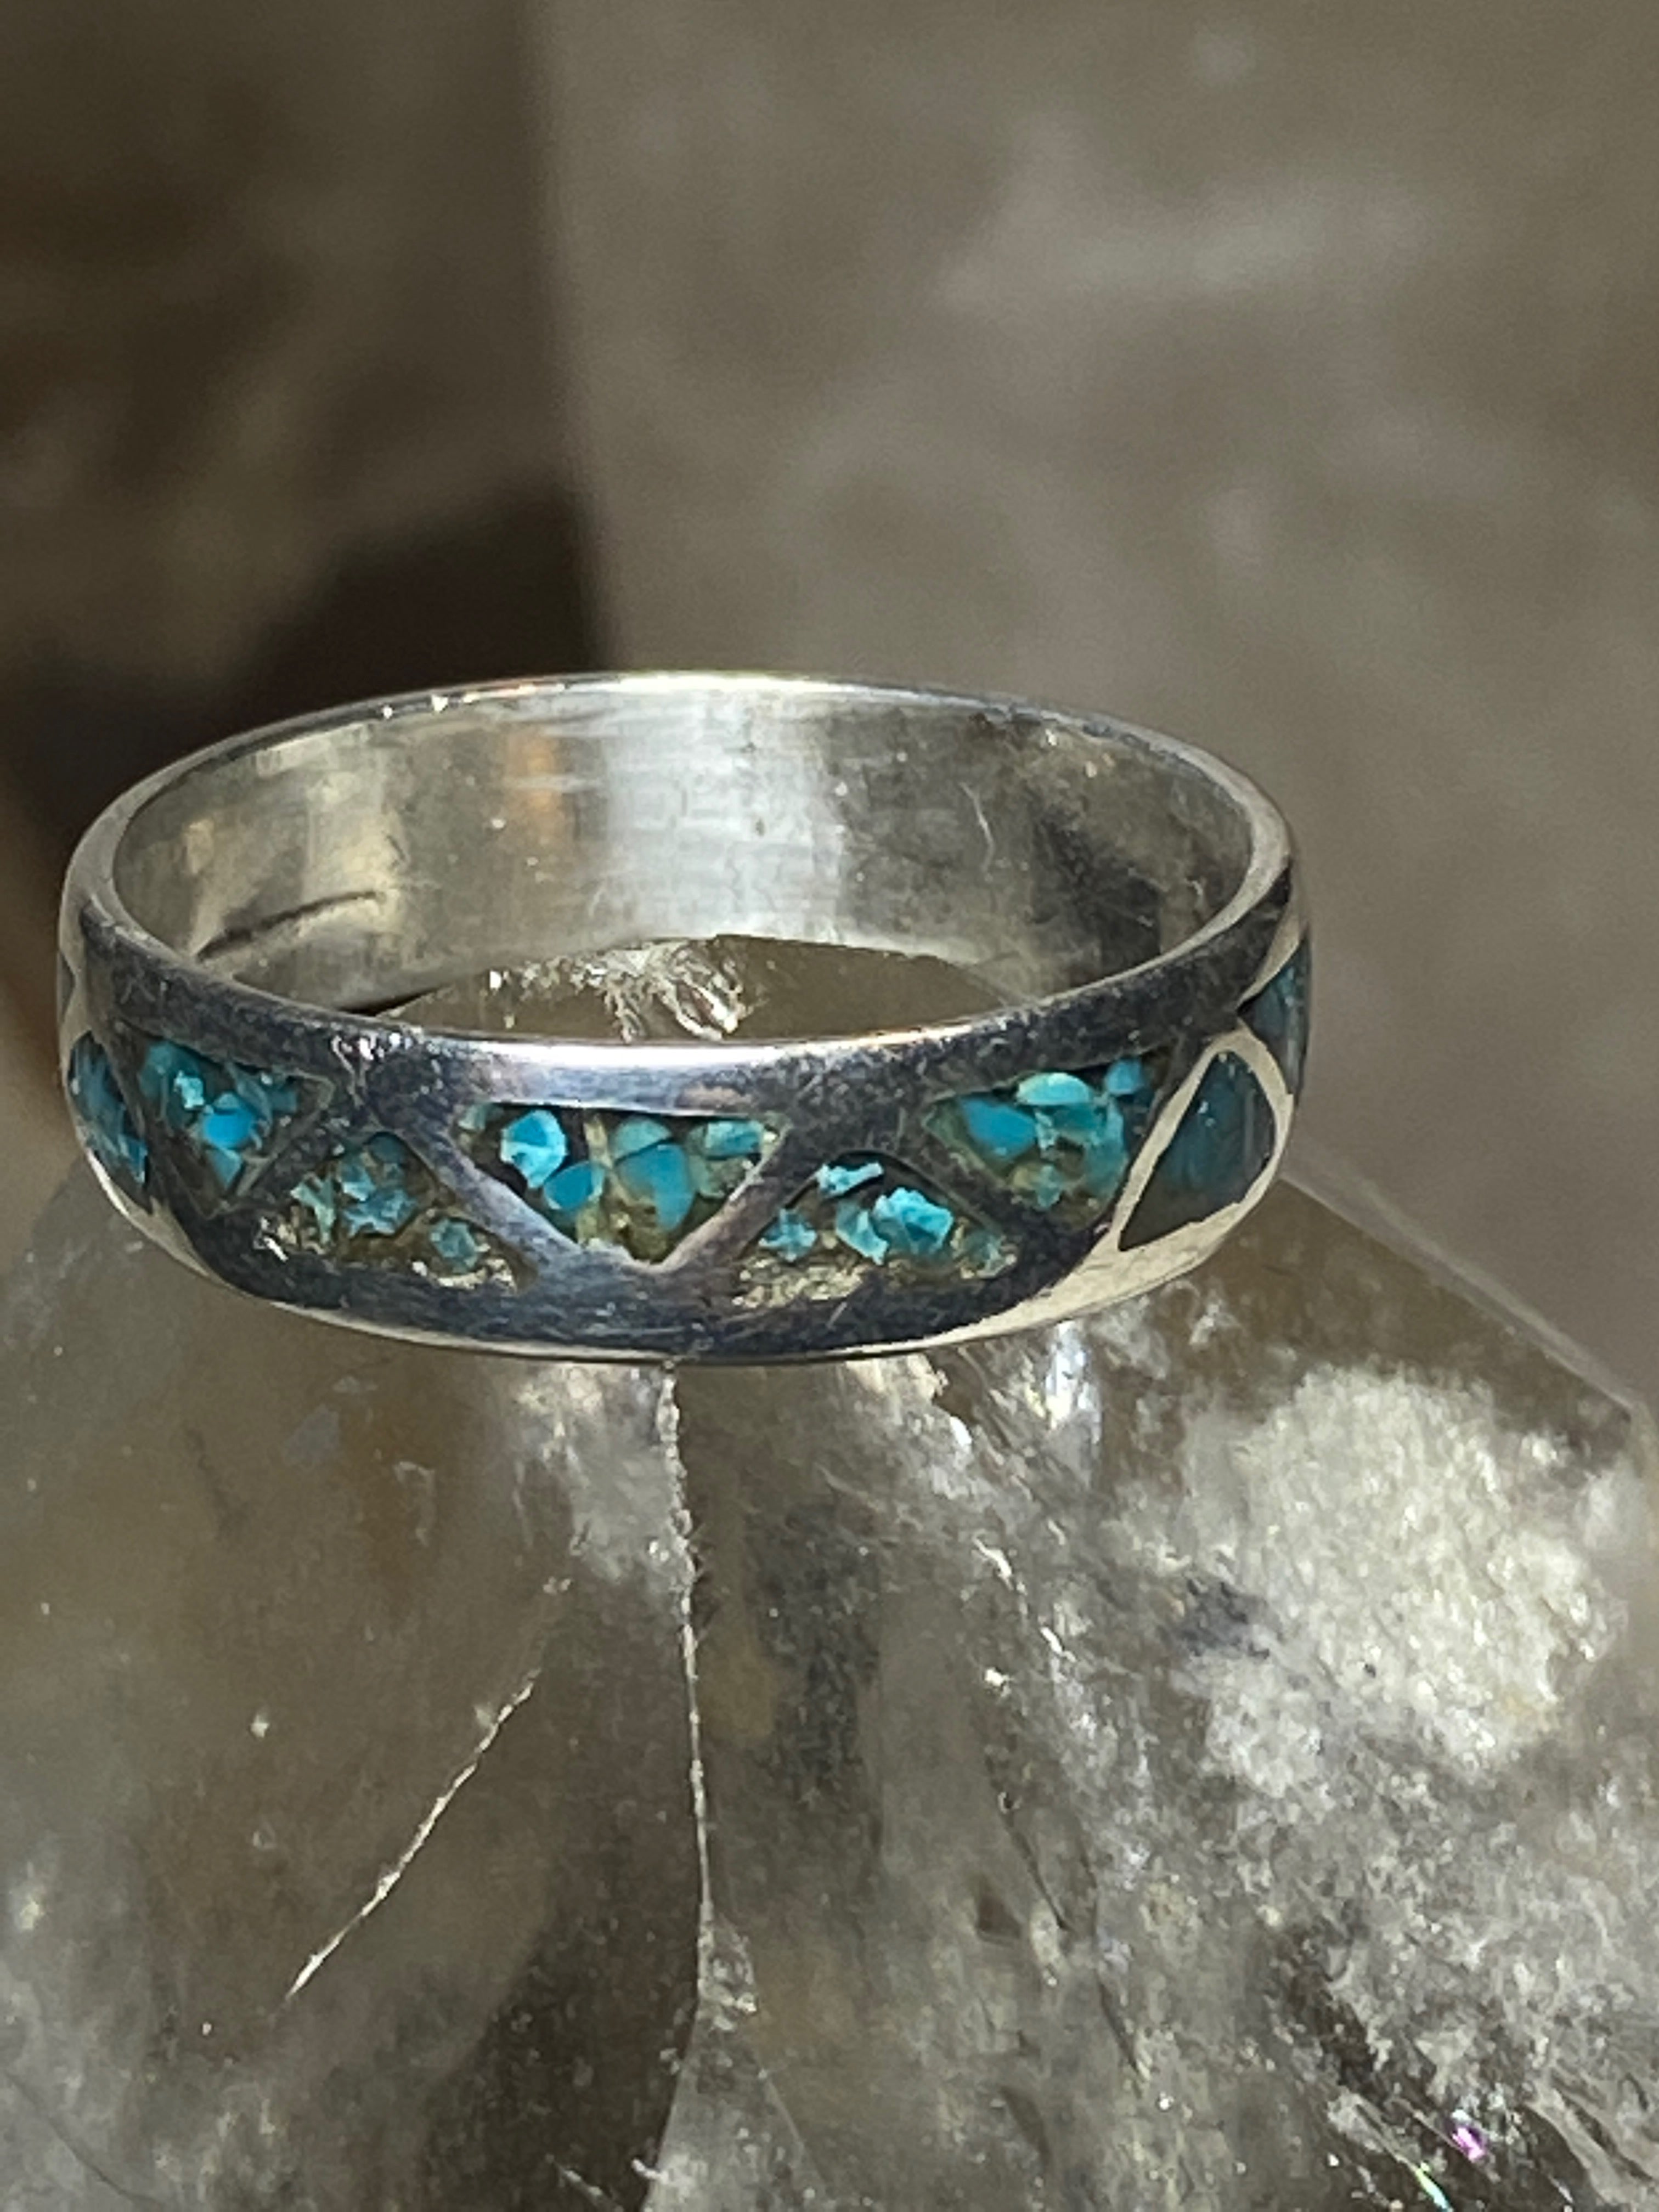 Buy Turquoise Ring, silver ring, Oval stone artisan Ring online at  aStudio1980.com